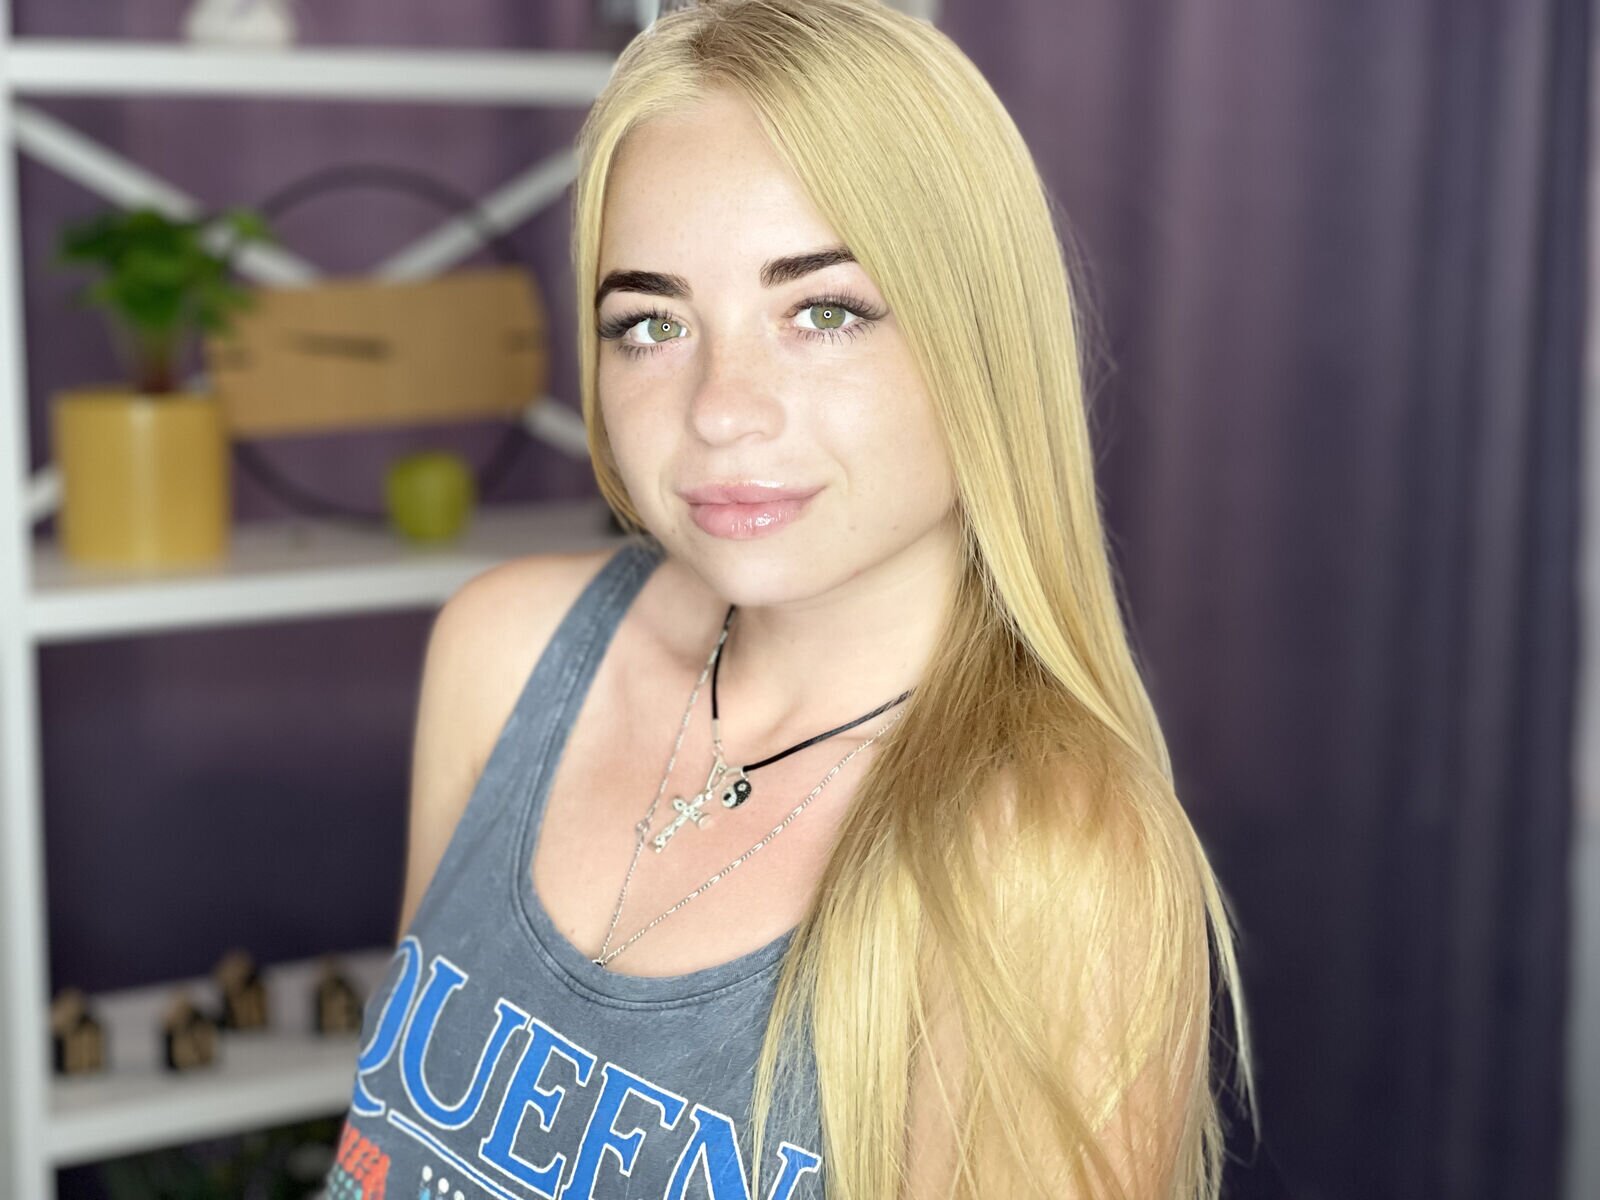 Free Live Sex Chat With SarahShawn